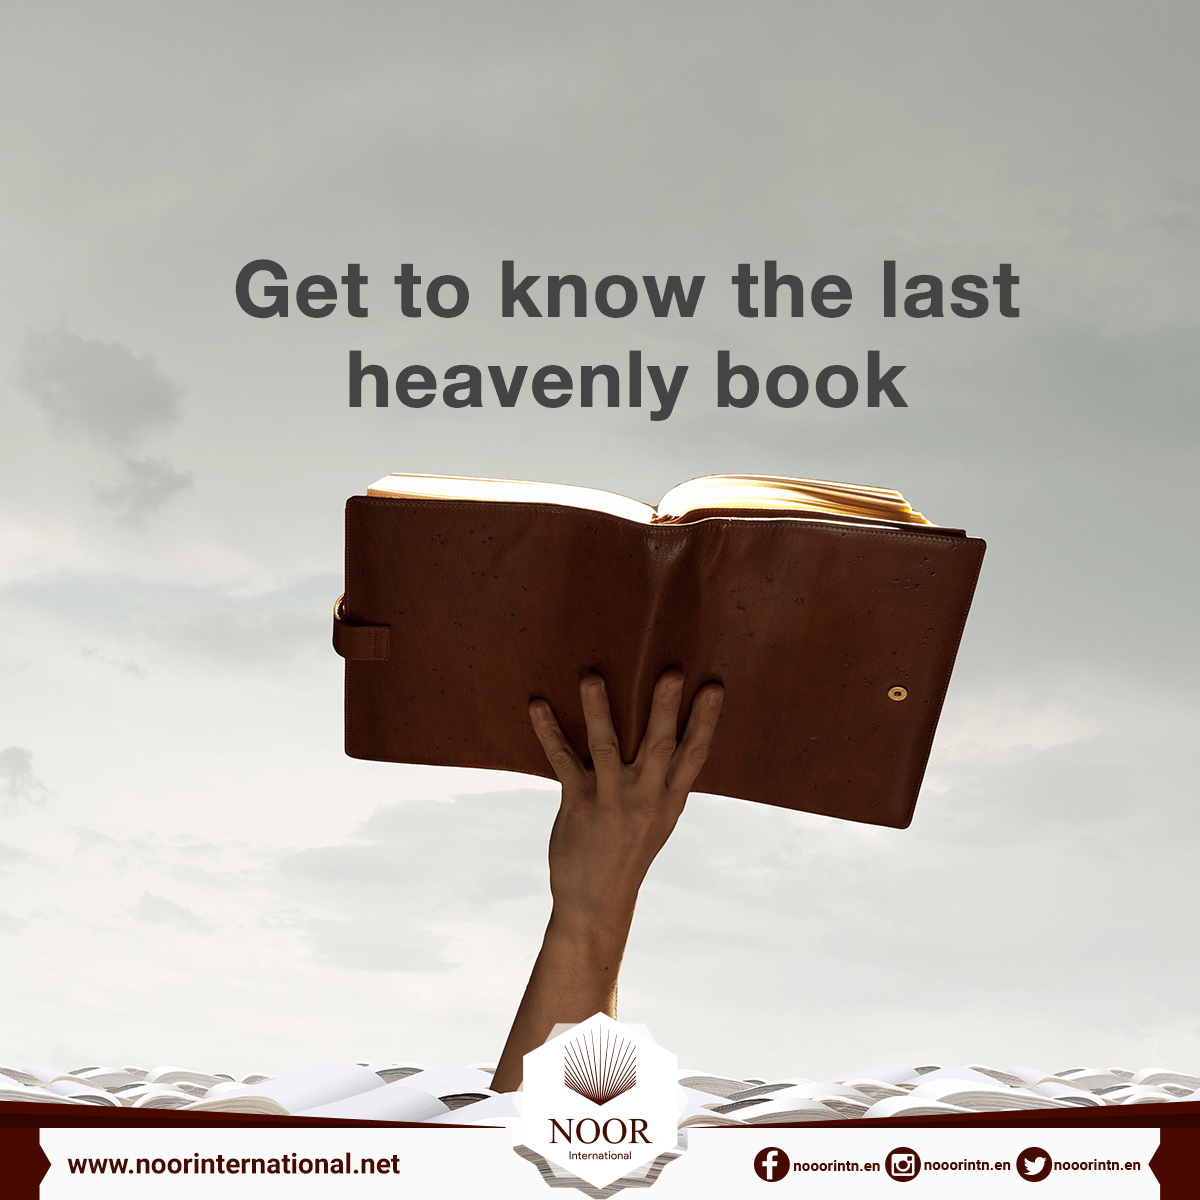 Get to know the last heavenly book